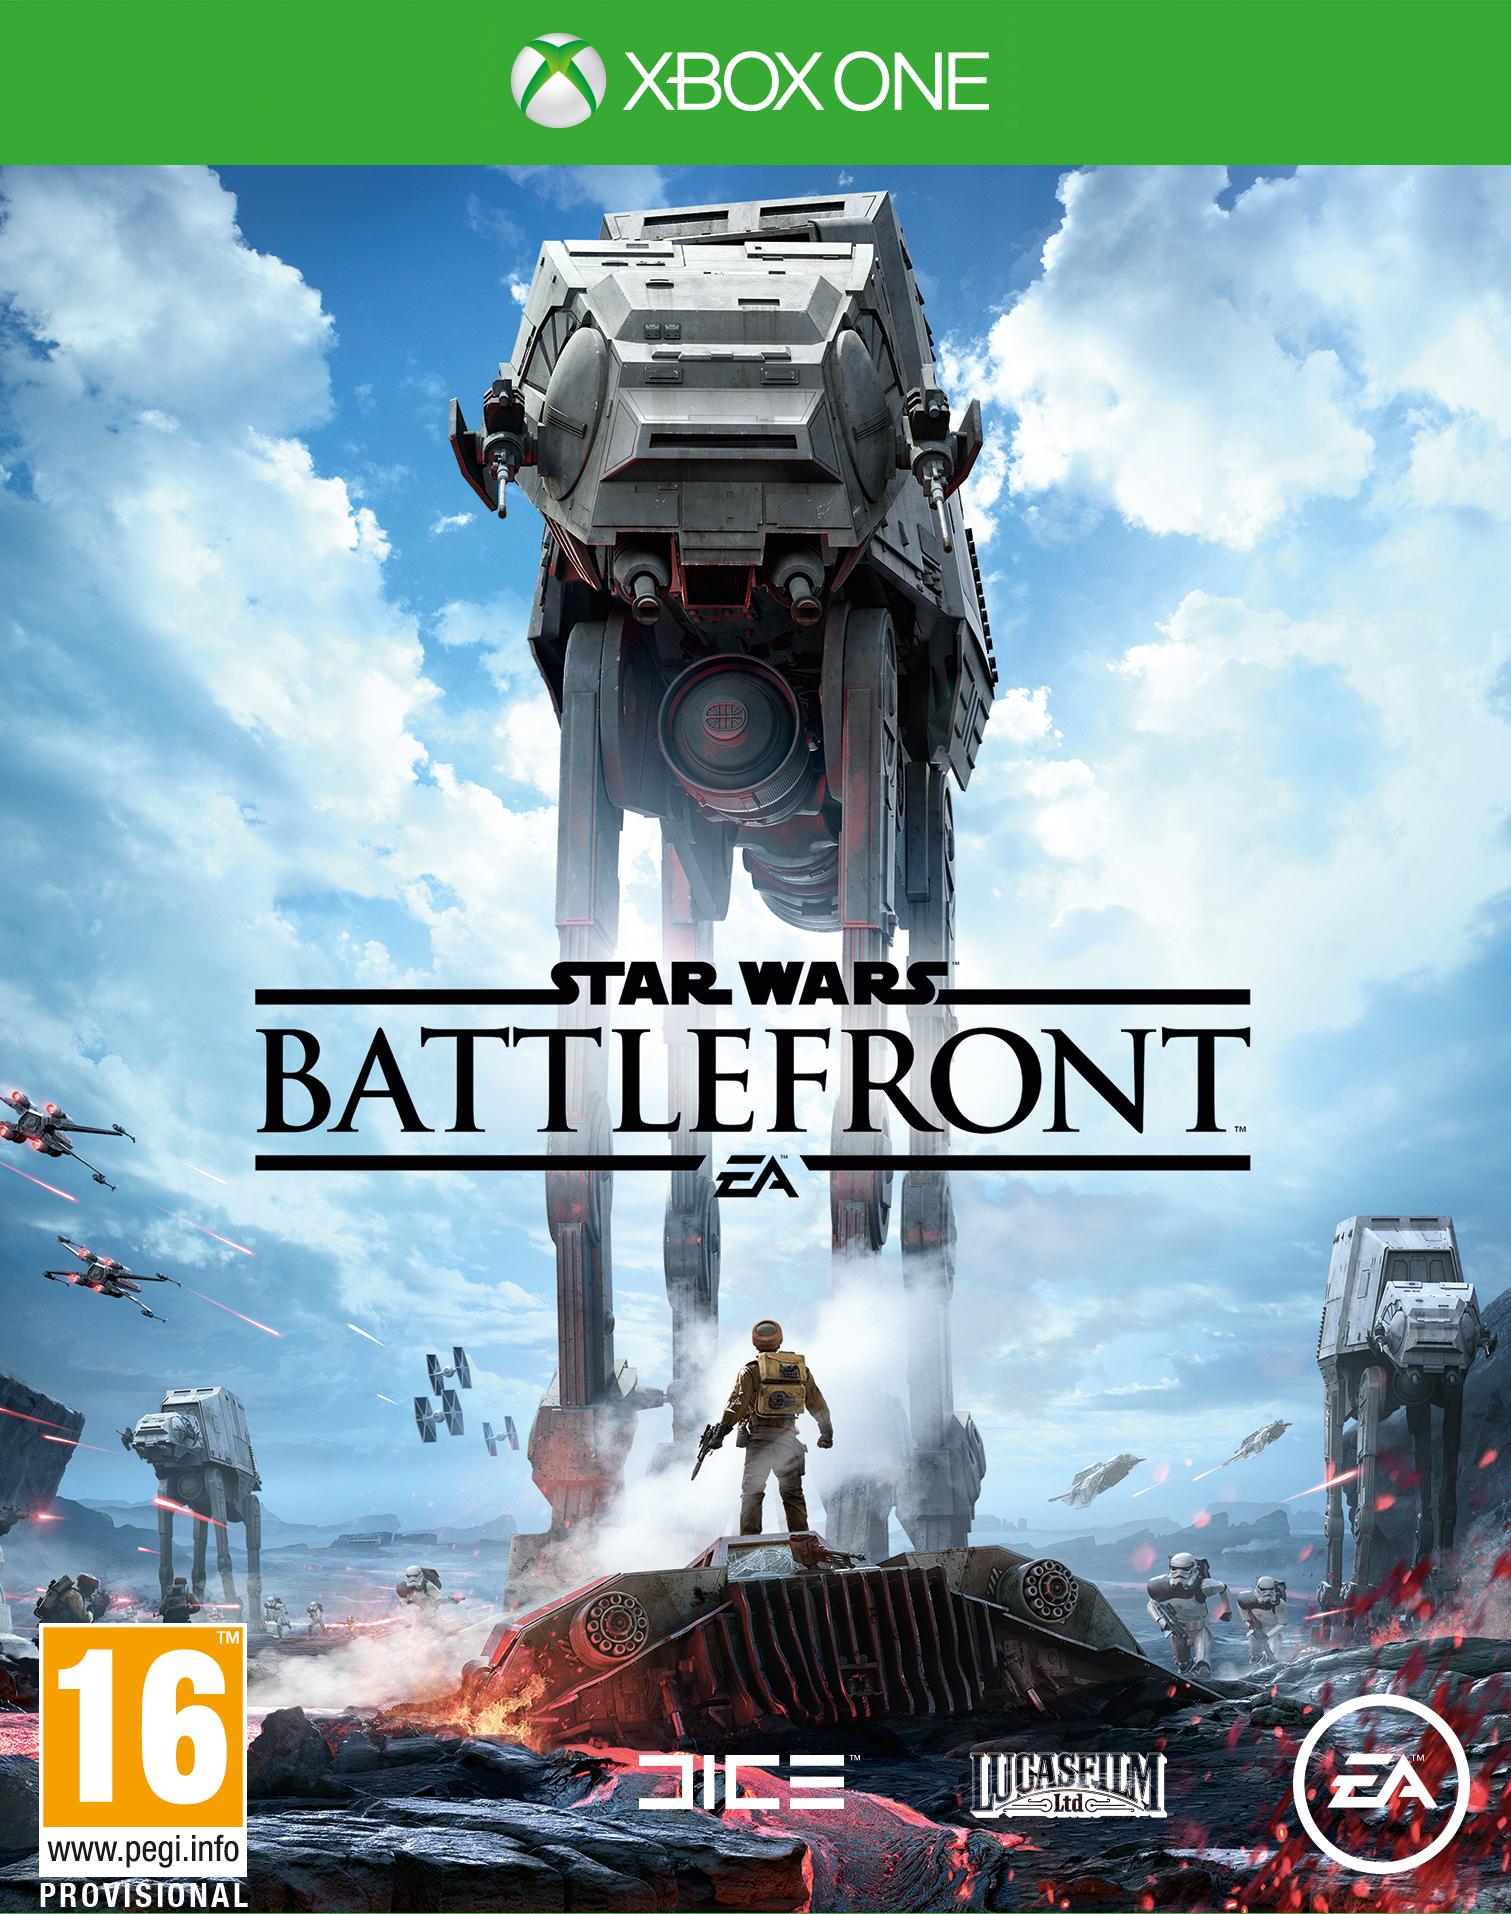 Star Wars: Battlefront (Xbox One), EA DICE